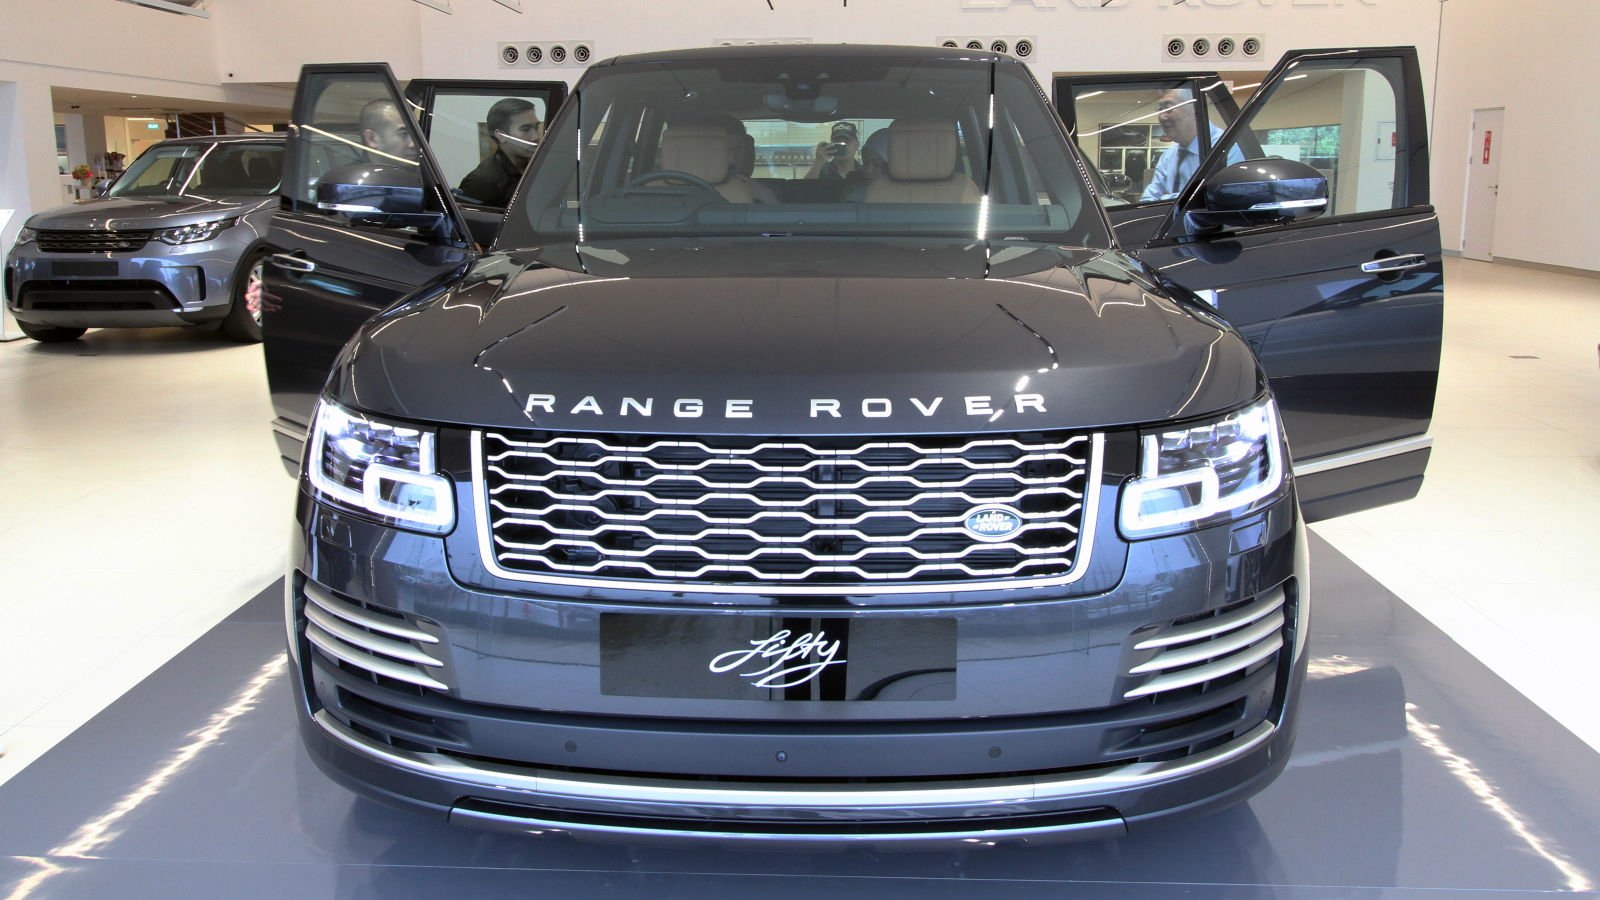 LIMITED EDITION RANGE ROVER FIFTY